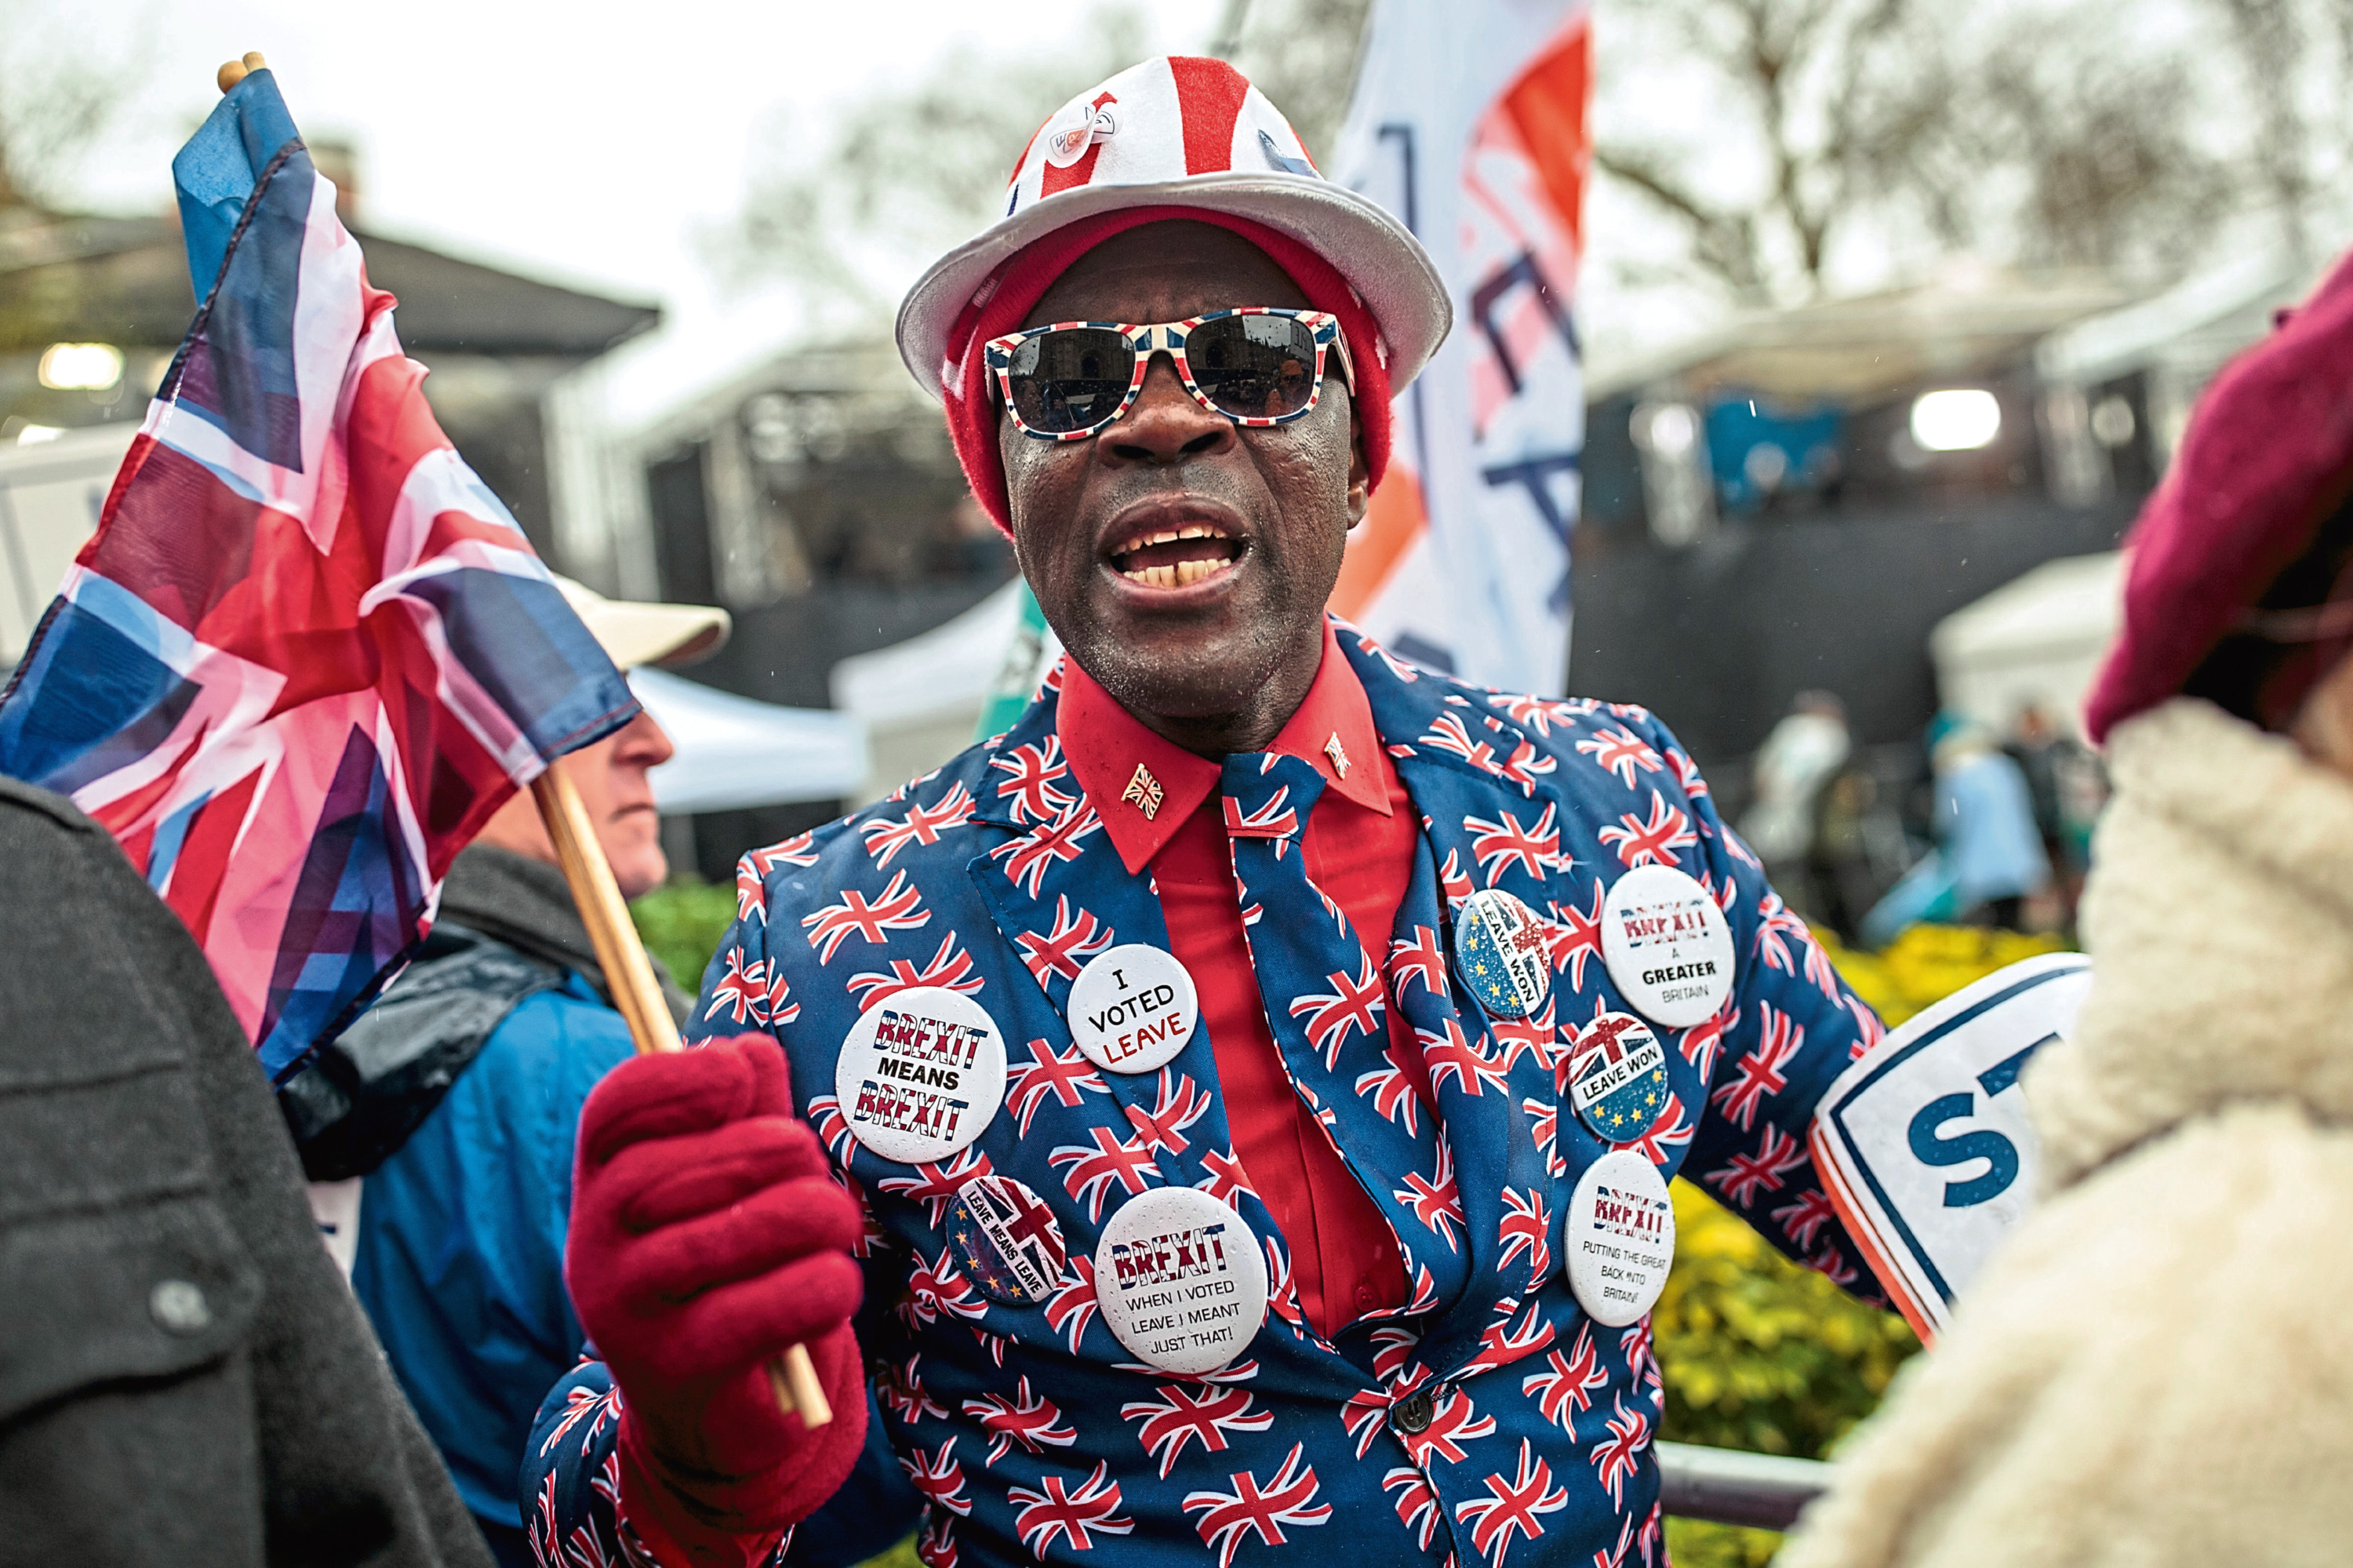 Pro-Brexit protesters demonstrate outside the Houses of Parliament on March 12, 2019 in London, England.